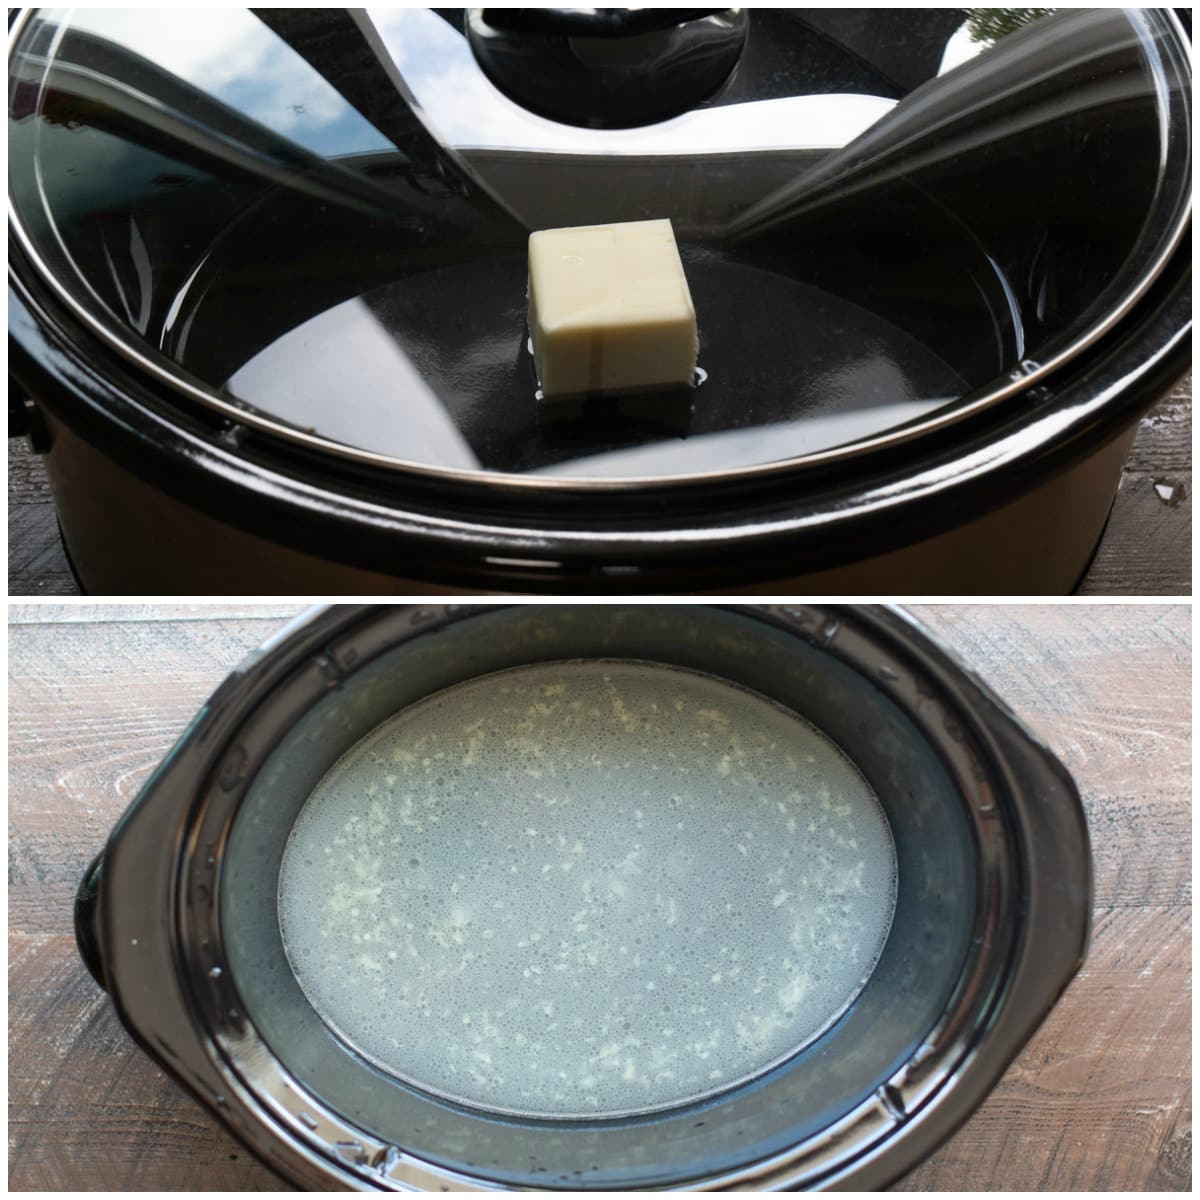 2 images. Top one butter and water in slow cooker. Bottom, melted butter and water in slow cooker.